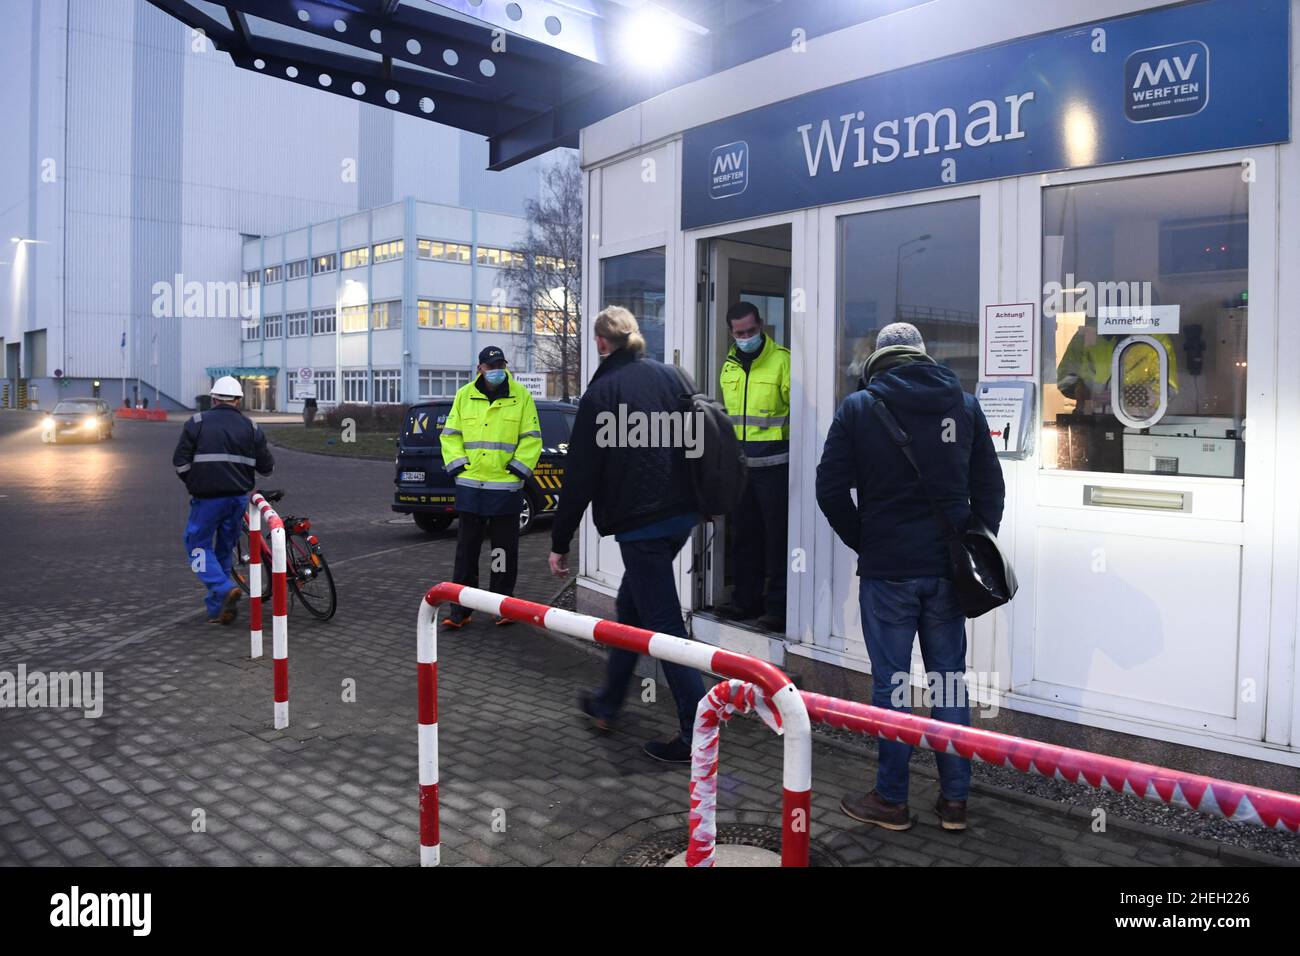 People stand at the entrance of the shipyard at the Wismar location of the MV-Werften shipyards which file insolvency, in Wismar, Germany January 11, 2022. REUTERS/Annegret Hilse Stock Photo